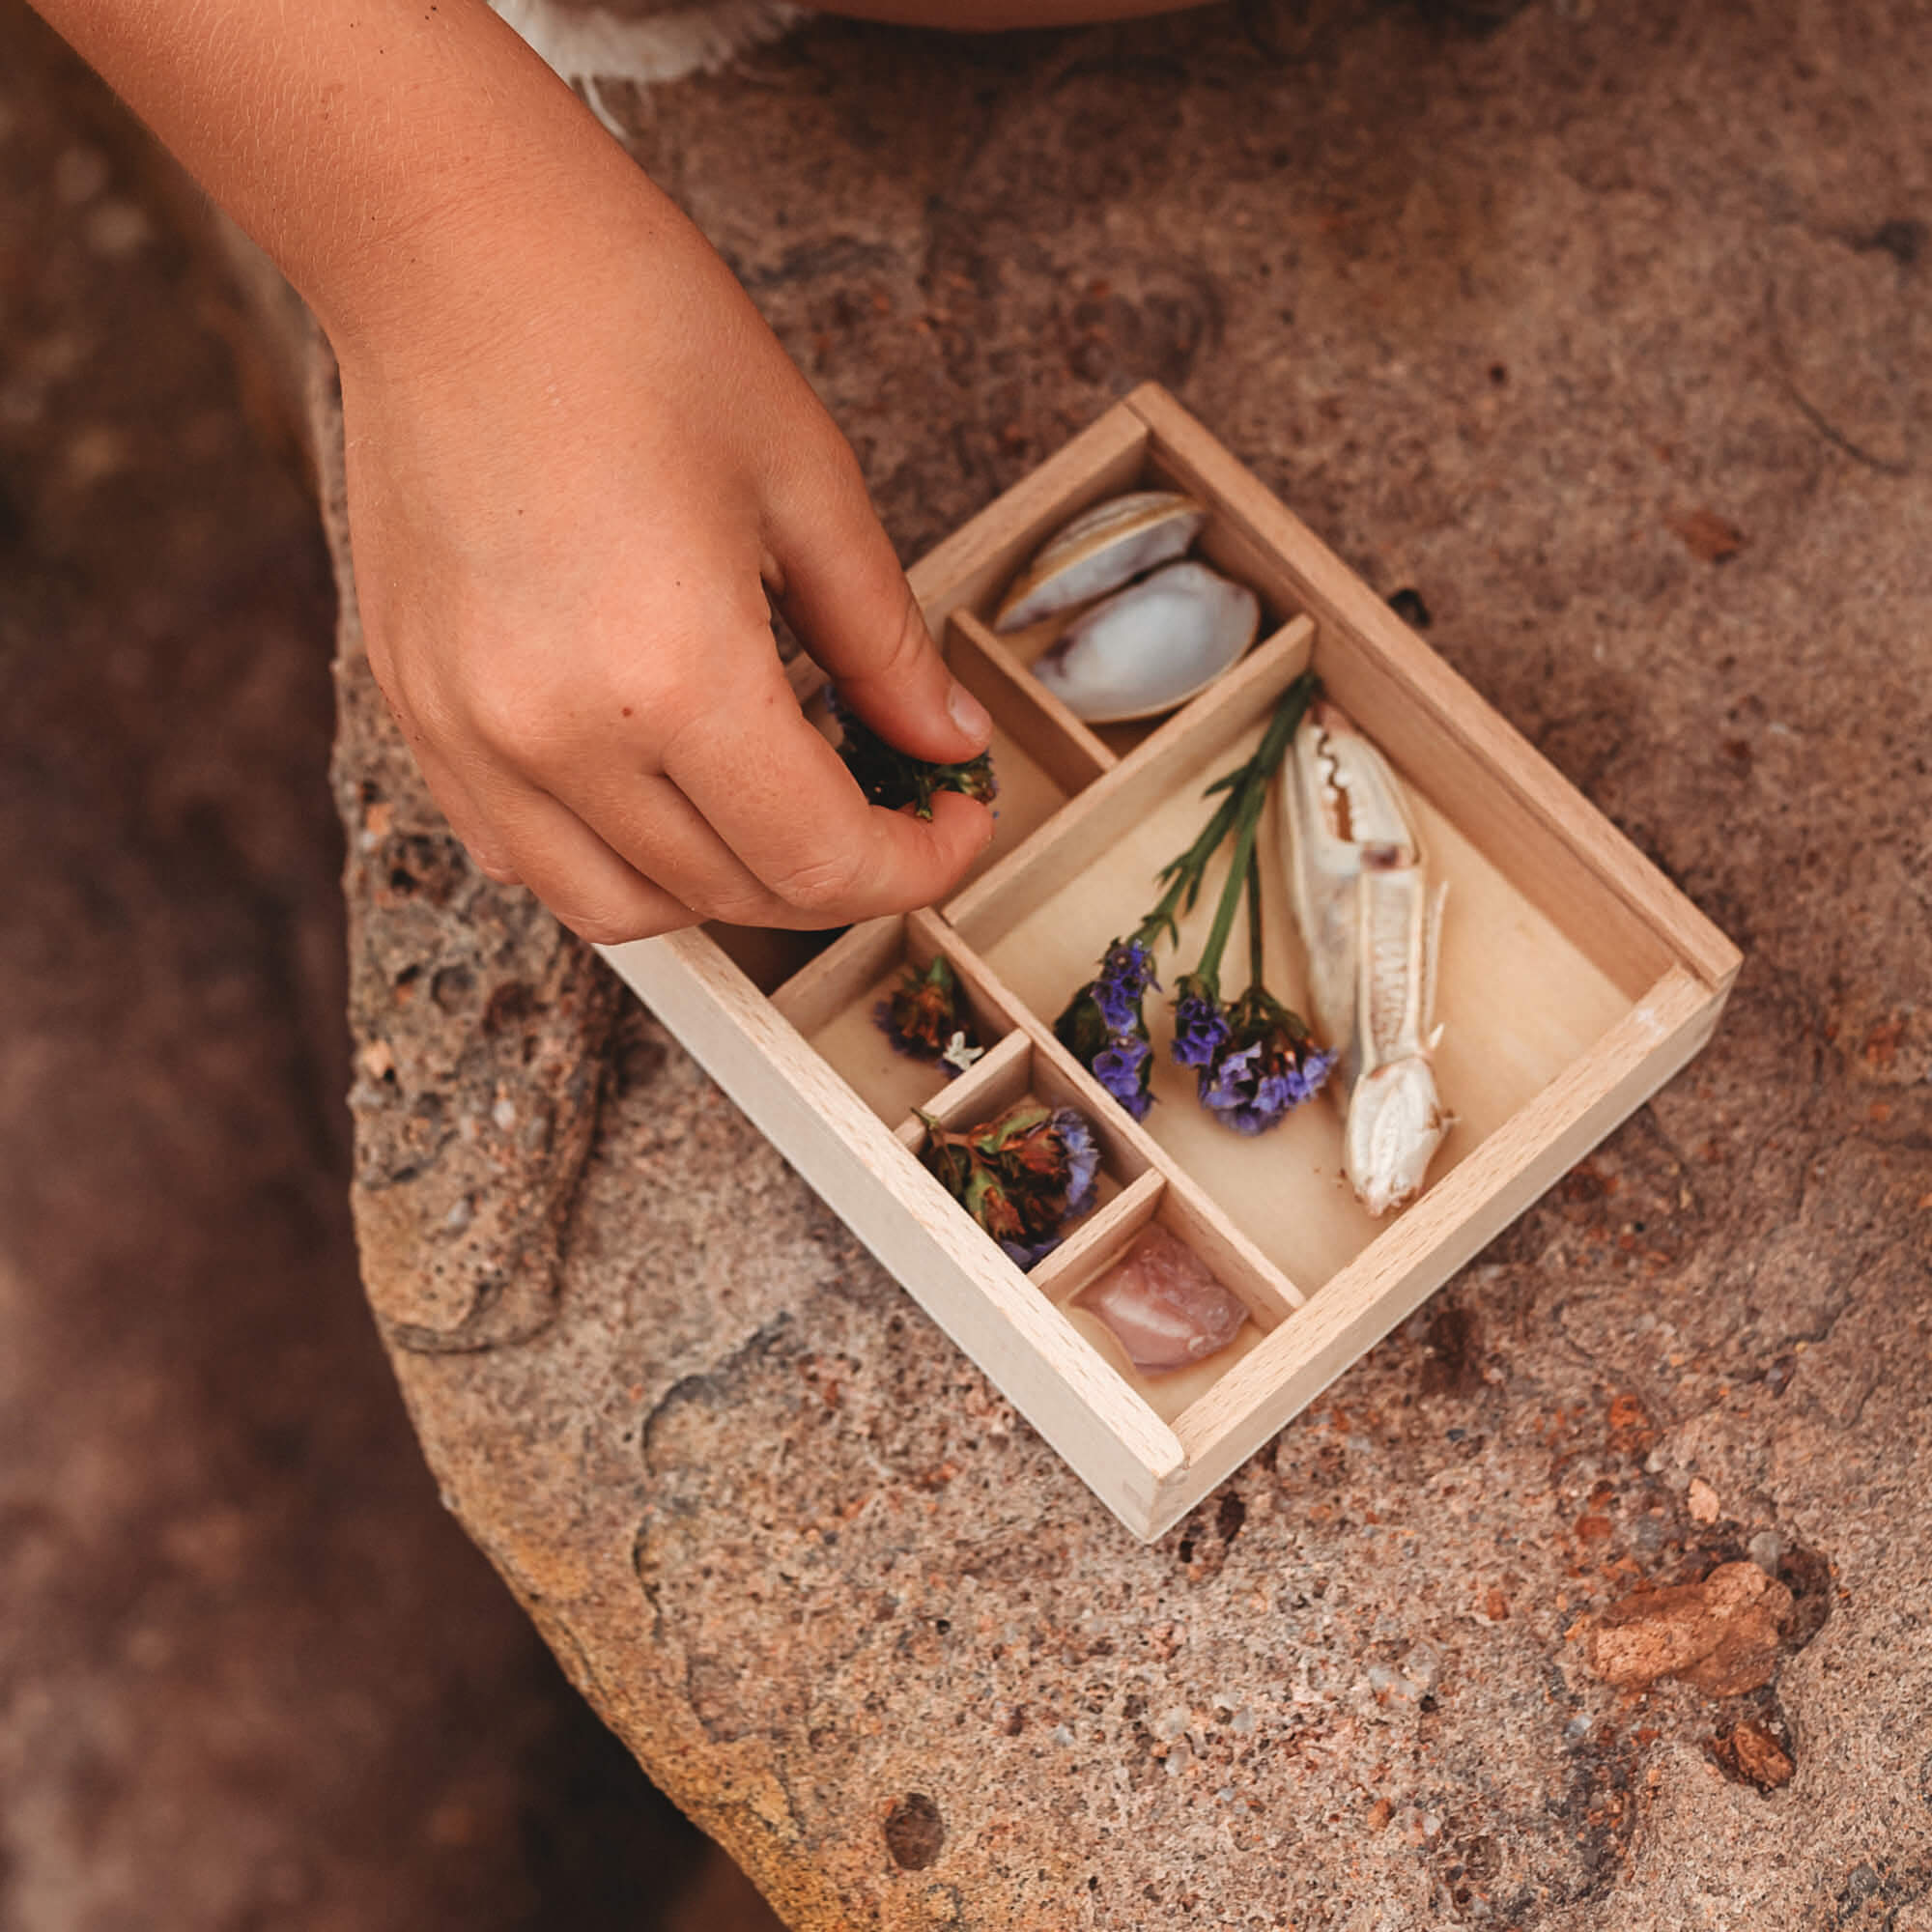 Girl placing nature inside Wooden bug box made by Kikkerland from Your Wild Books. Crab claw, flowers, and shells inside the wooden compartments with magnifying lenses.